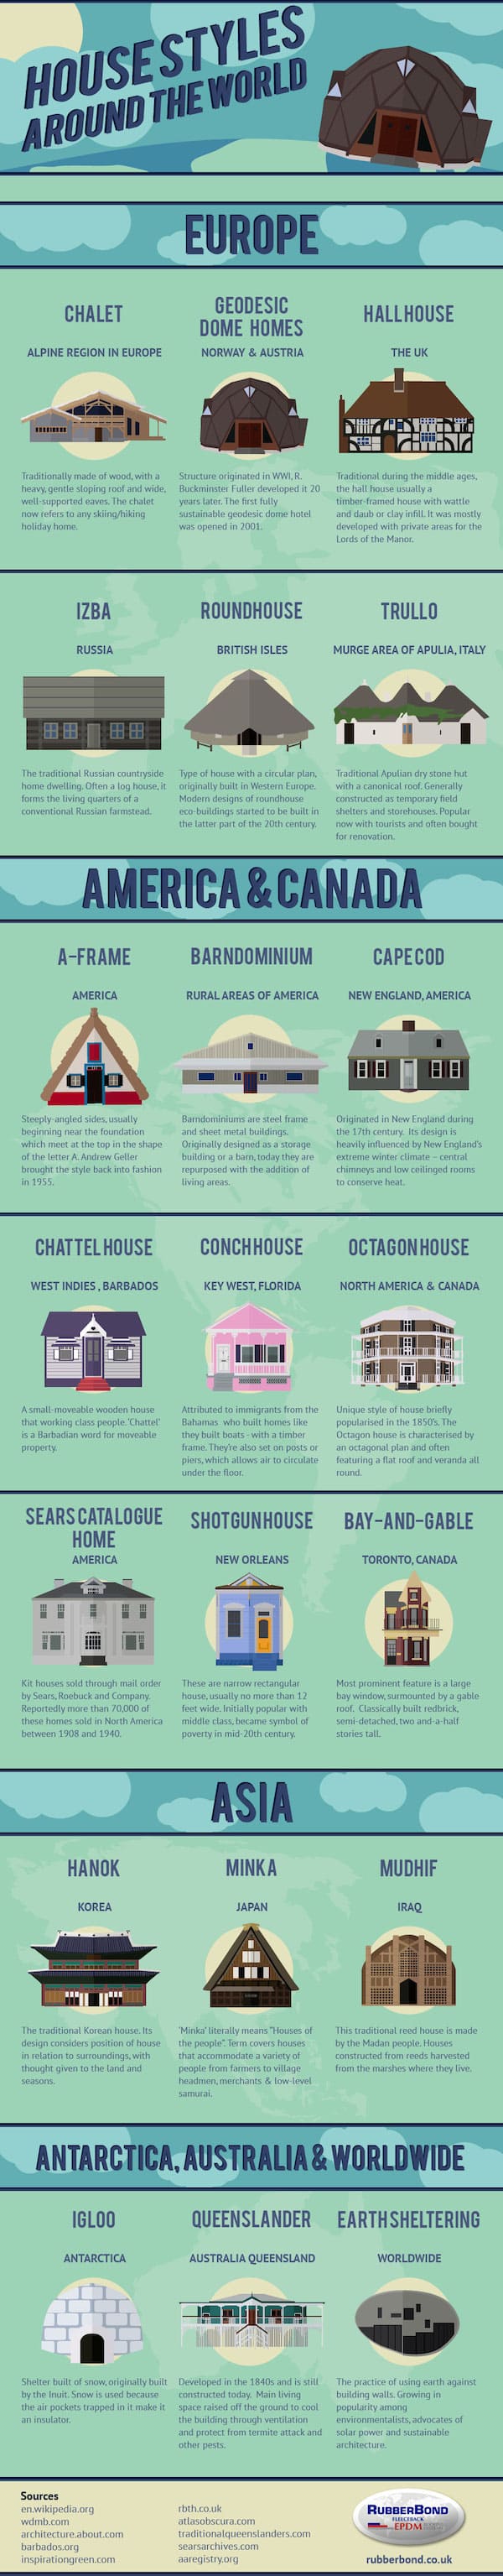 infographic shares 21 house styles from around the world, including geodesic, igloos, sears catalogue